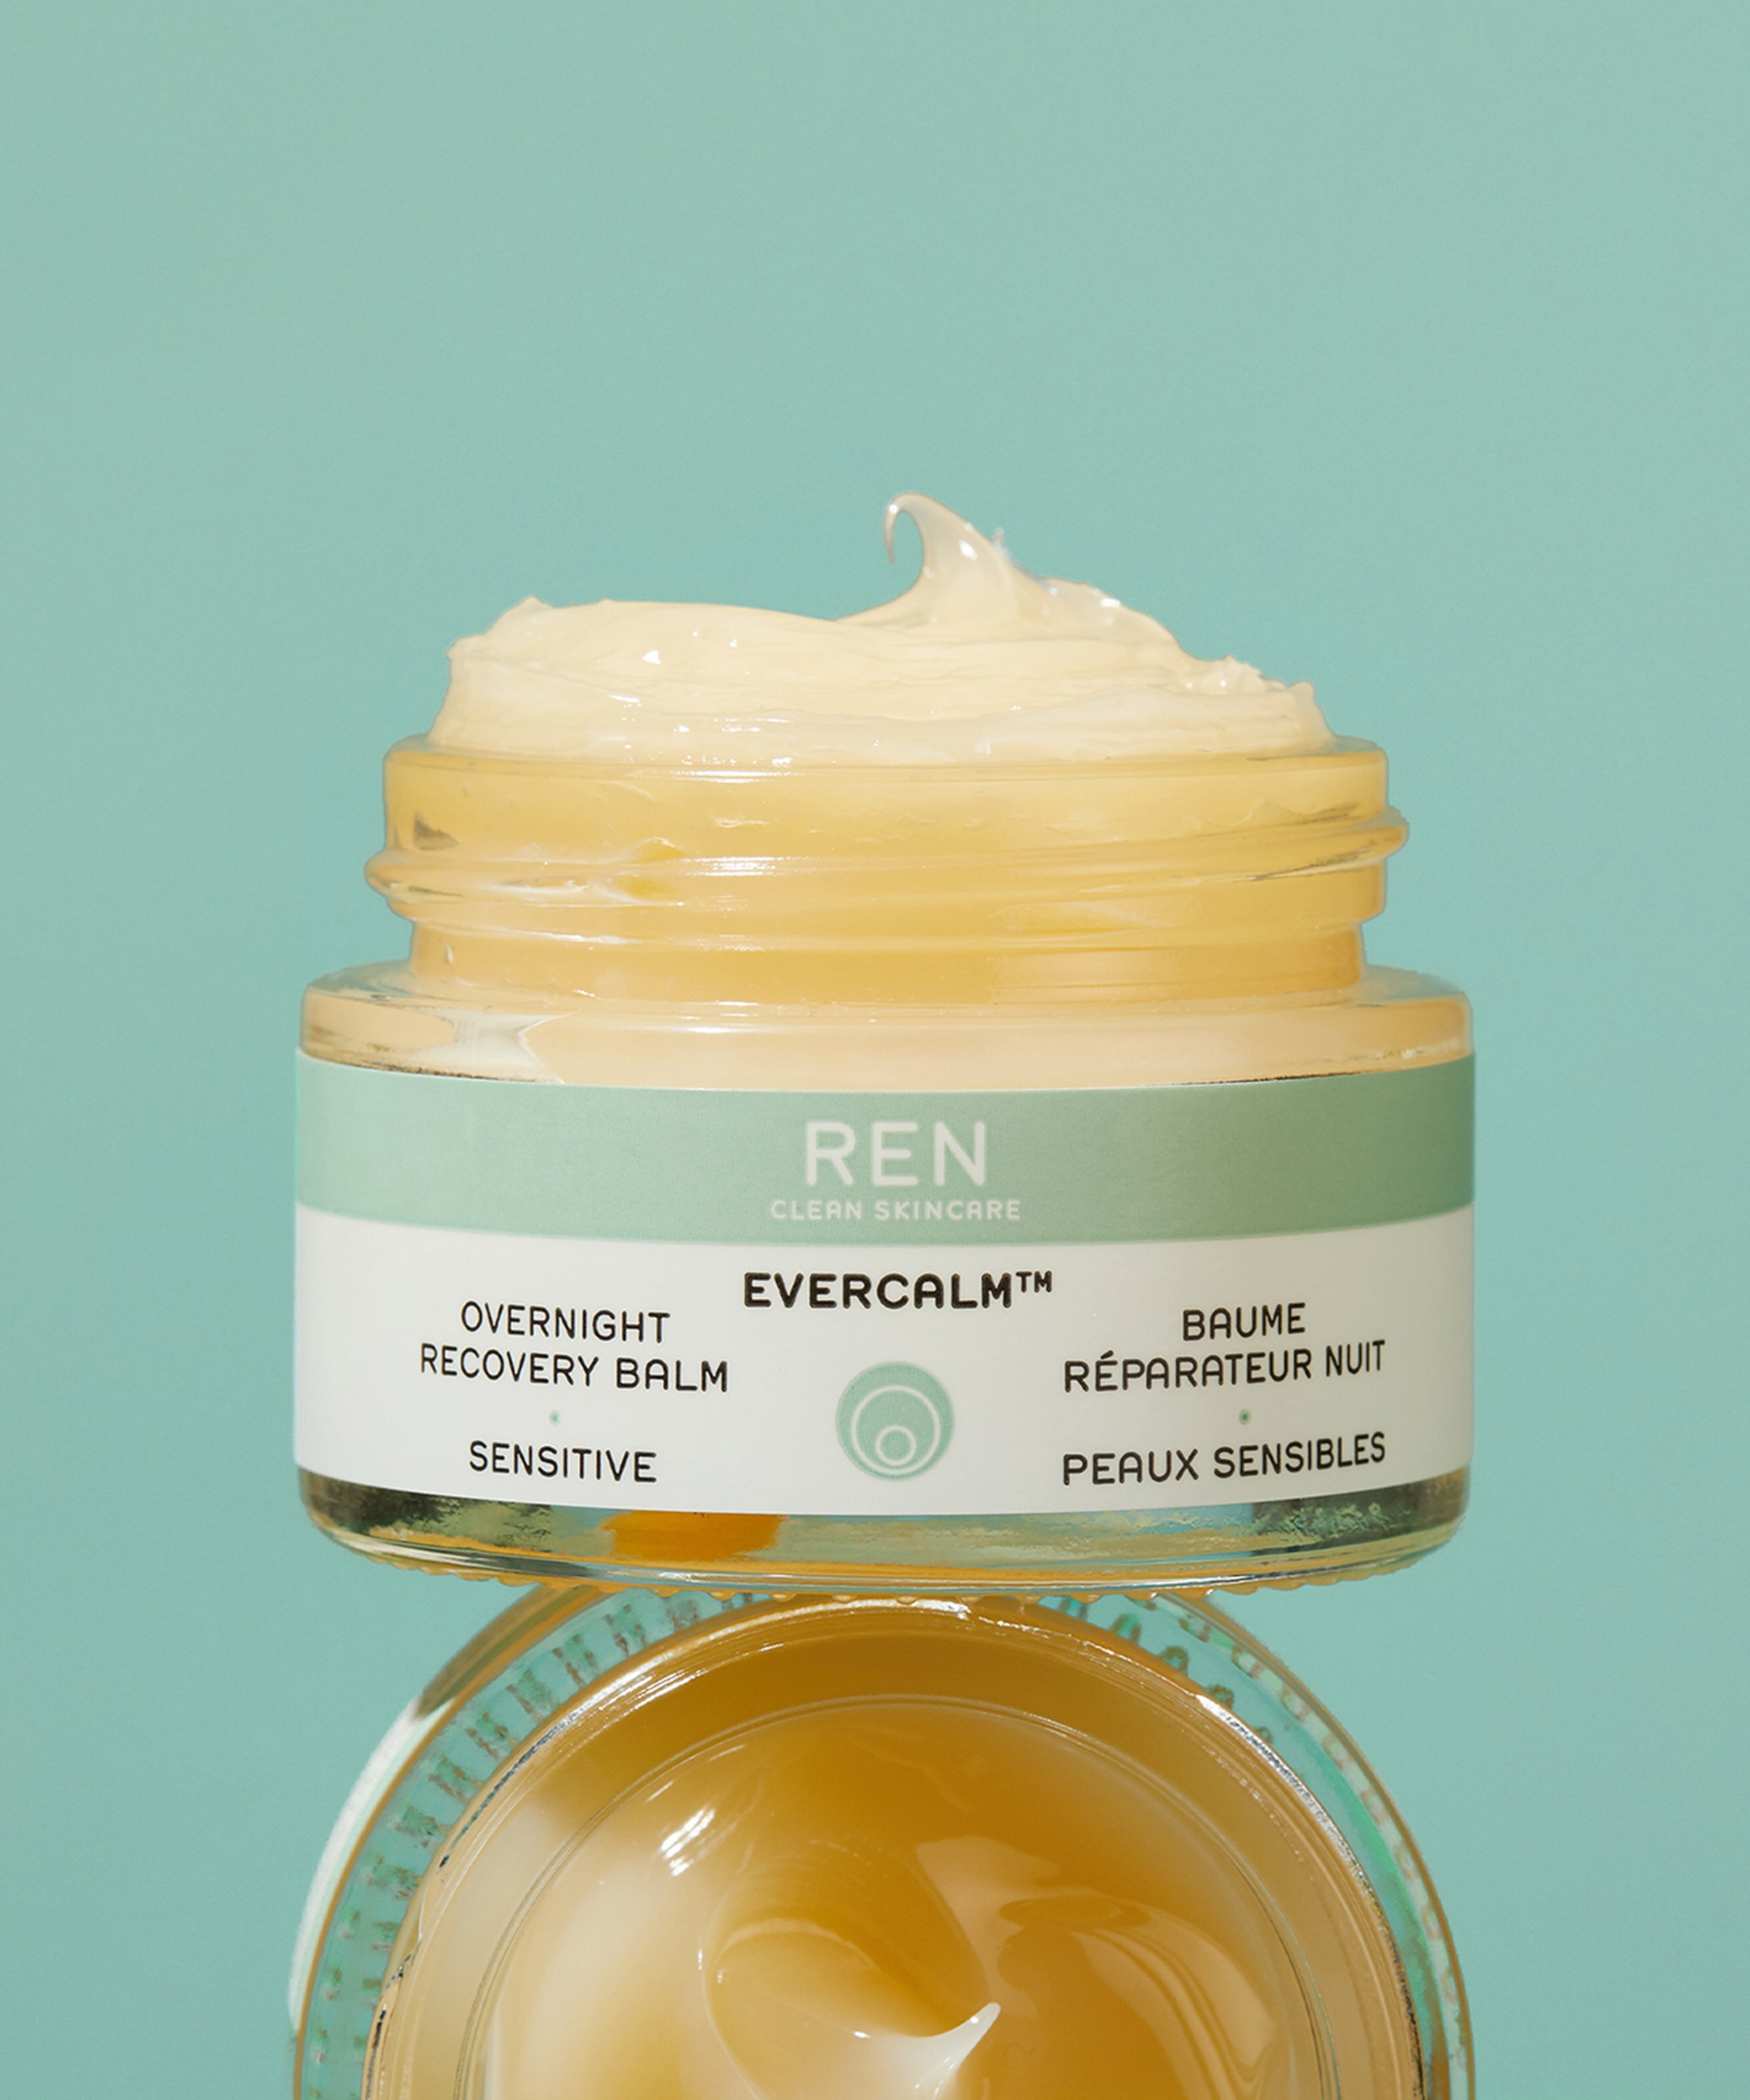 REN Clean Skincare - Evercalm™ Overnight Recovery Balm 30ml image number 3